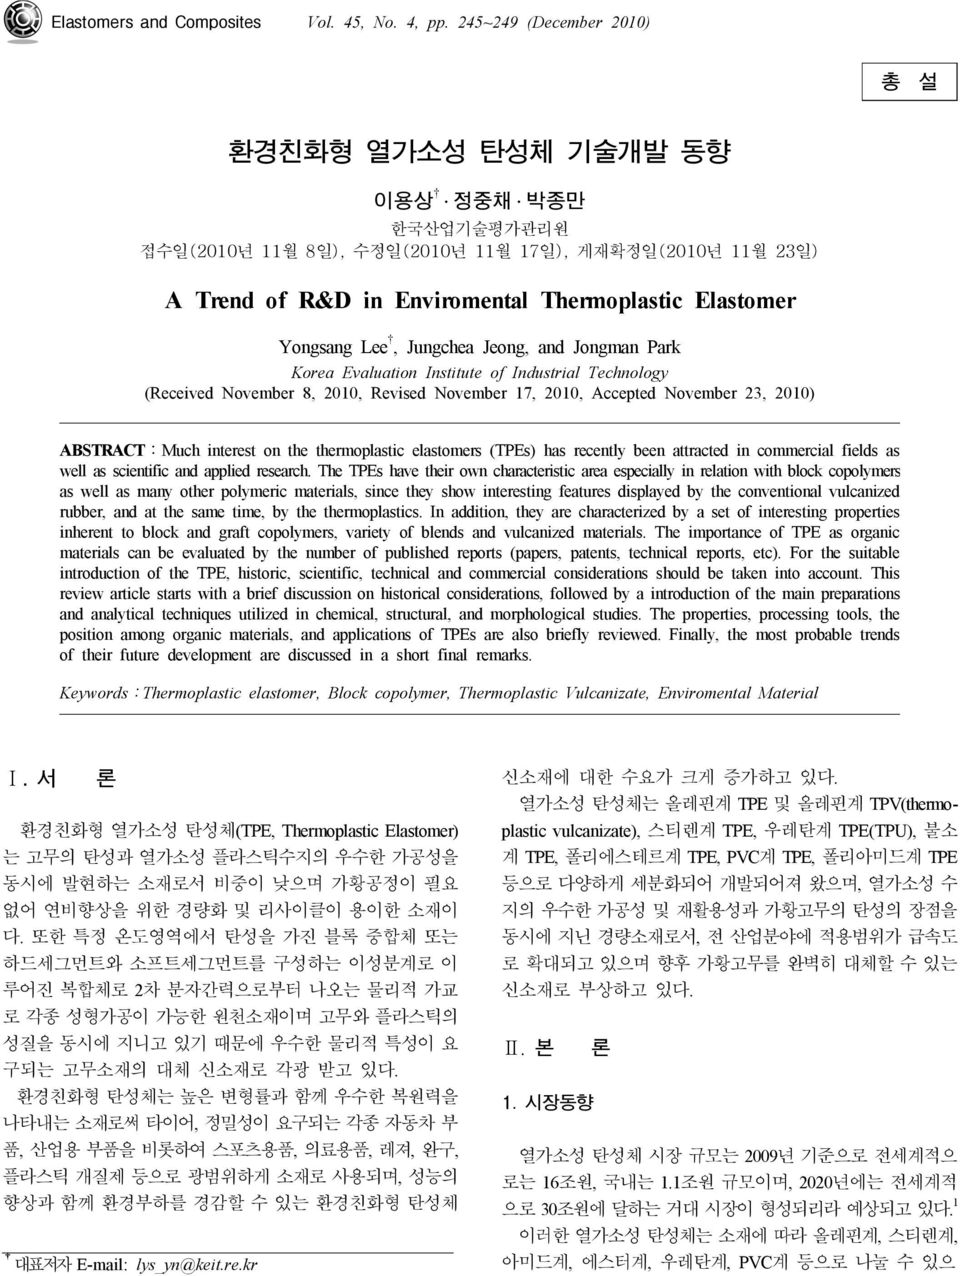 Yongsang Lee, Jungchea Jeong, and Jongman Park Korea Evaluation Institute of Industrial Technology (Received November 8, 2010, Revised November 17, 2010, Accepted November 23, 2010) ABSTRACT:Much